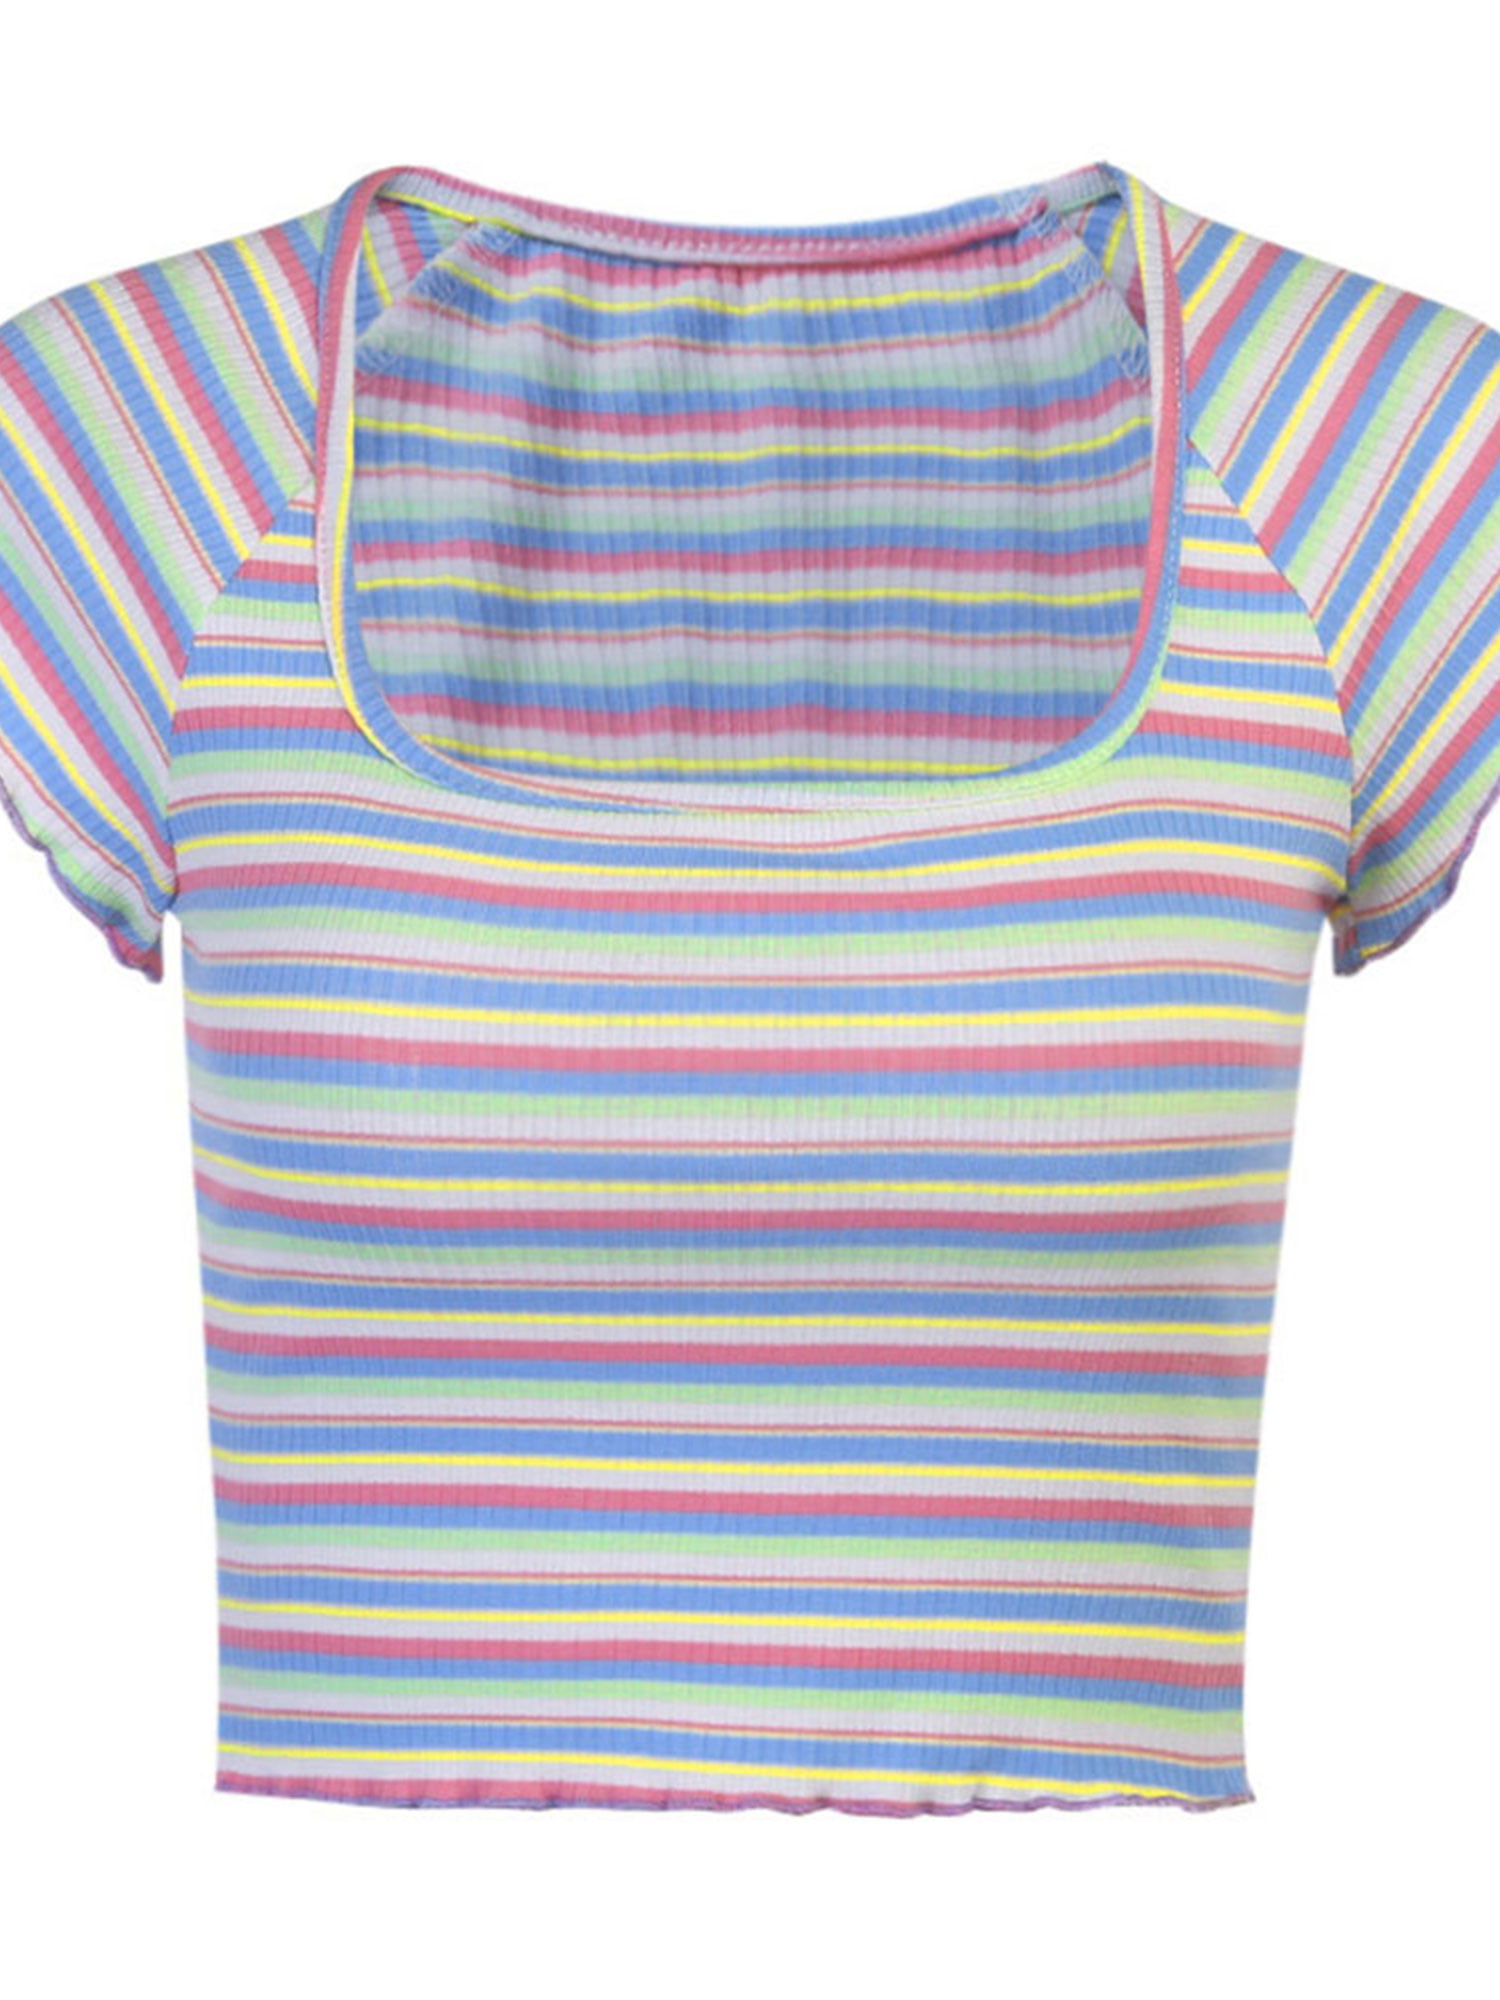 Mfasica Mens Summer Multicolor Striped Printed Short Sleeve Silm Fit Round Collar T-Shirt Top 